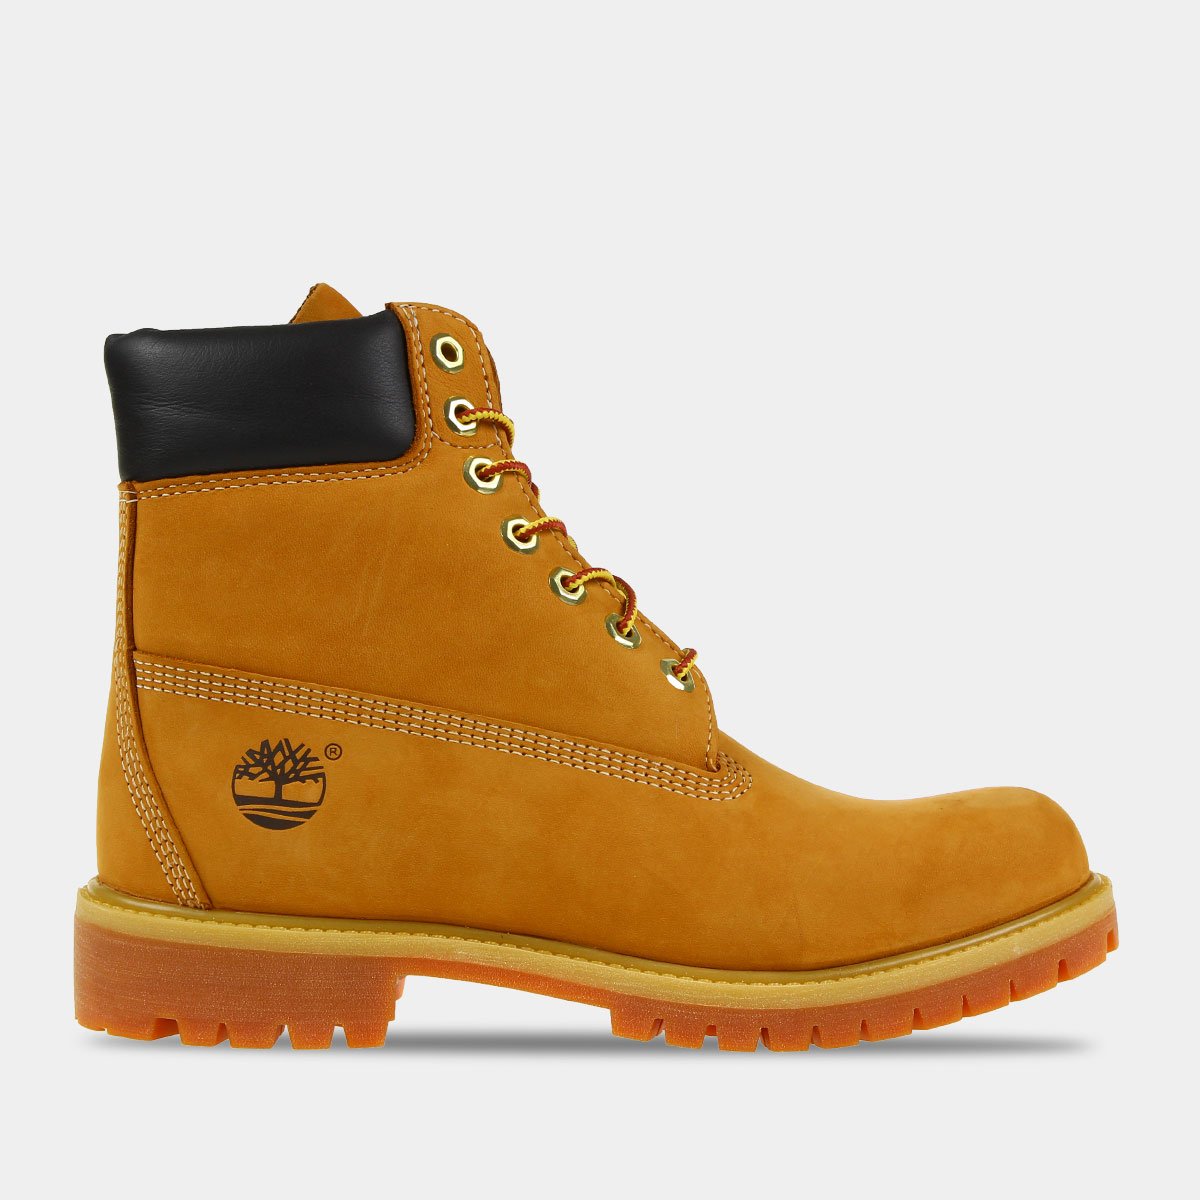 Timberland 6 inch Boot